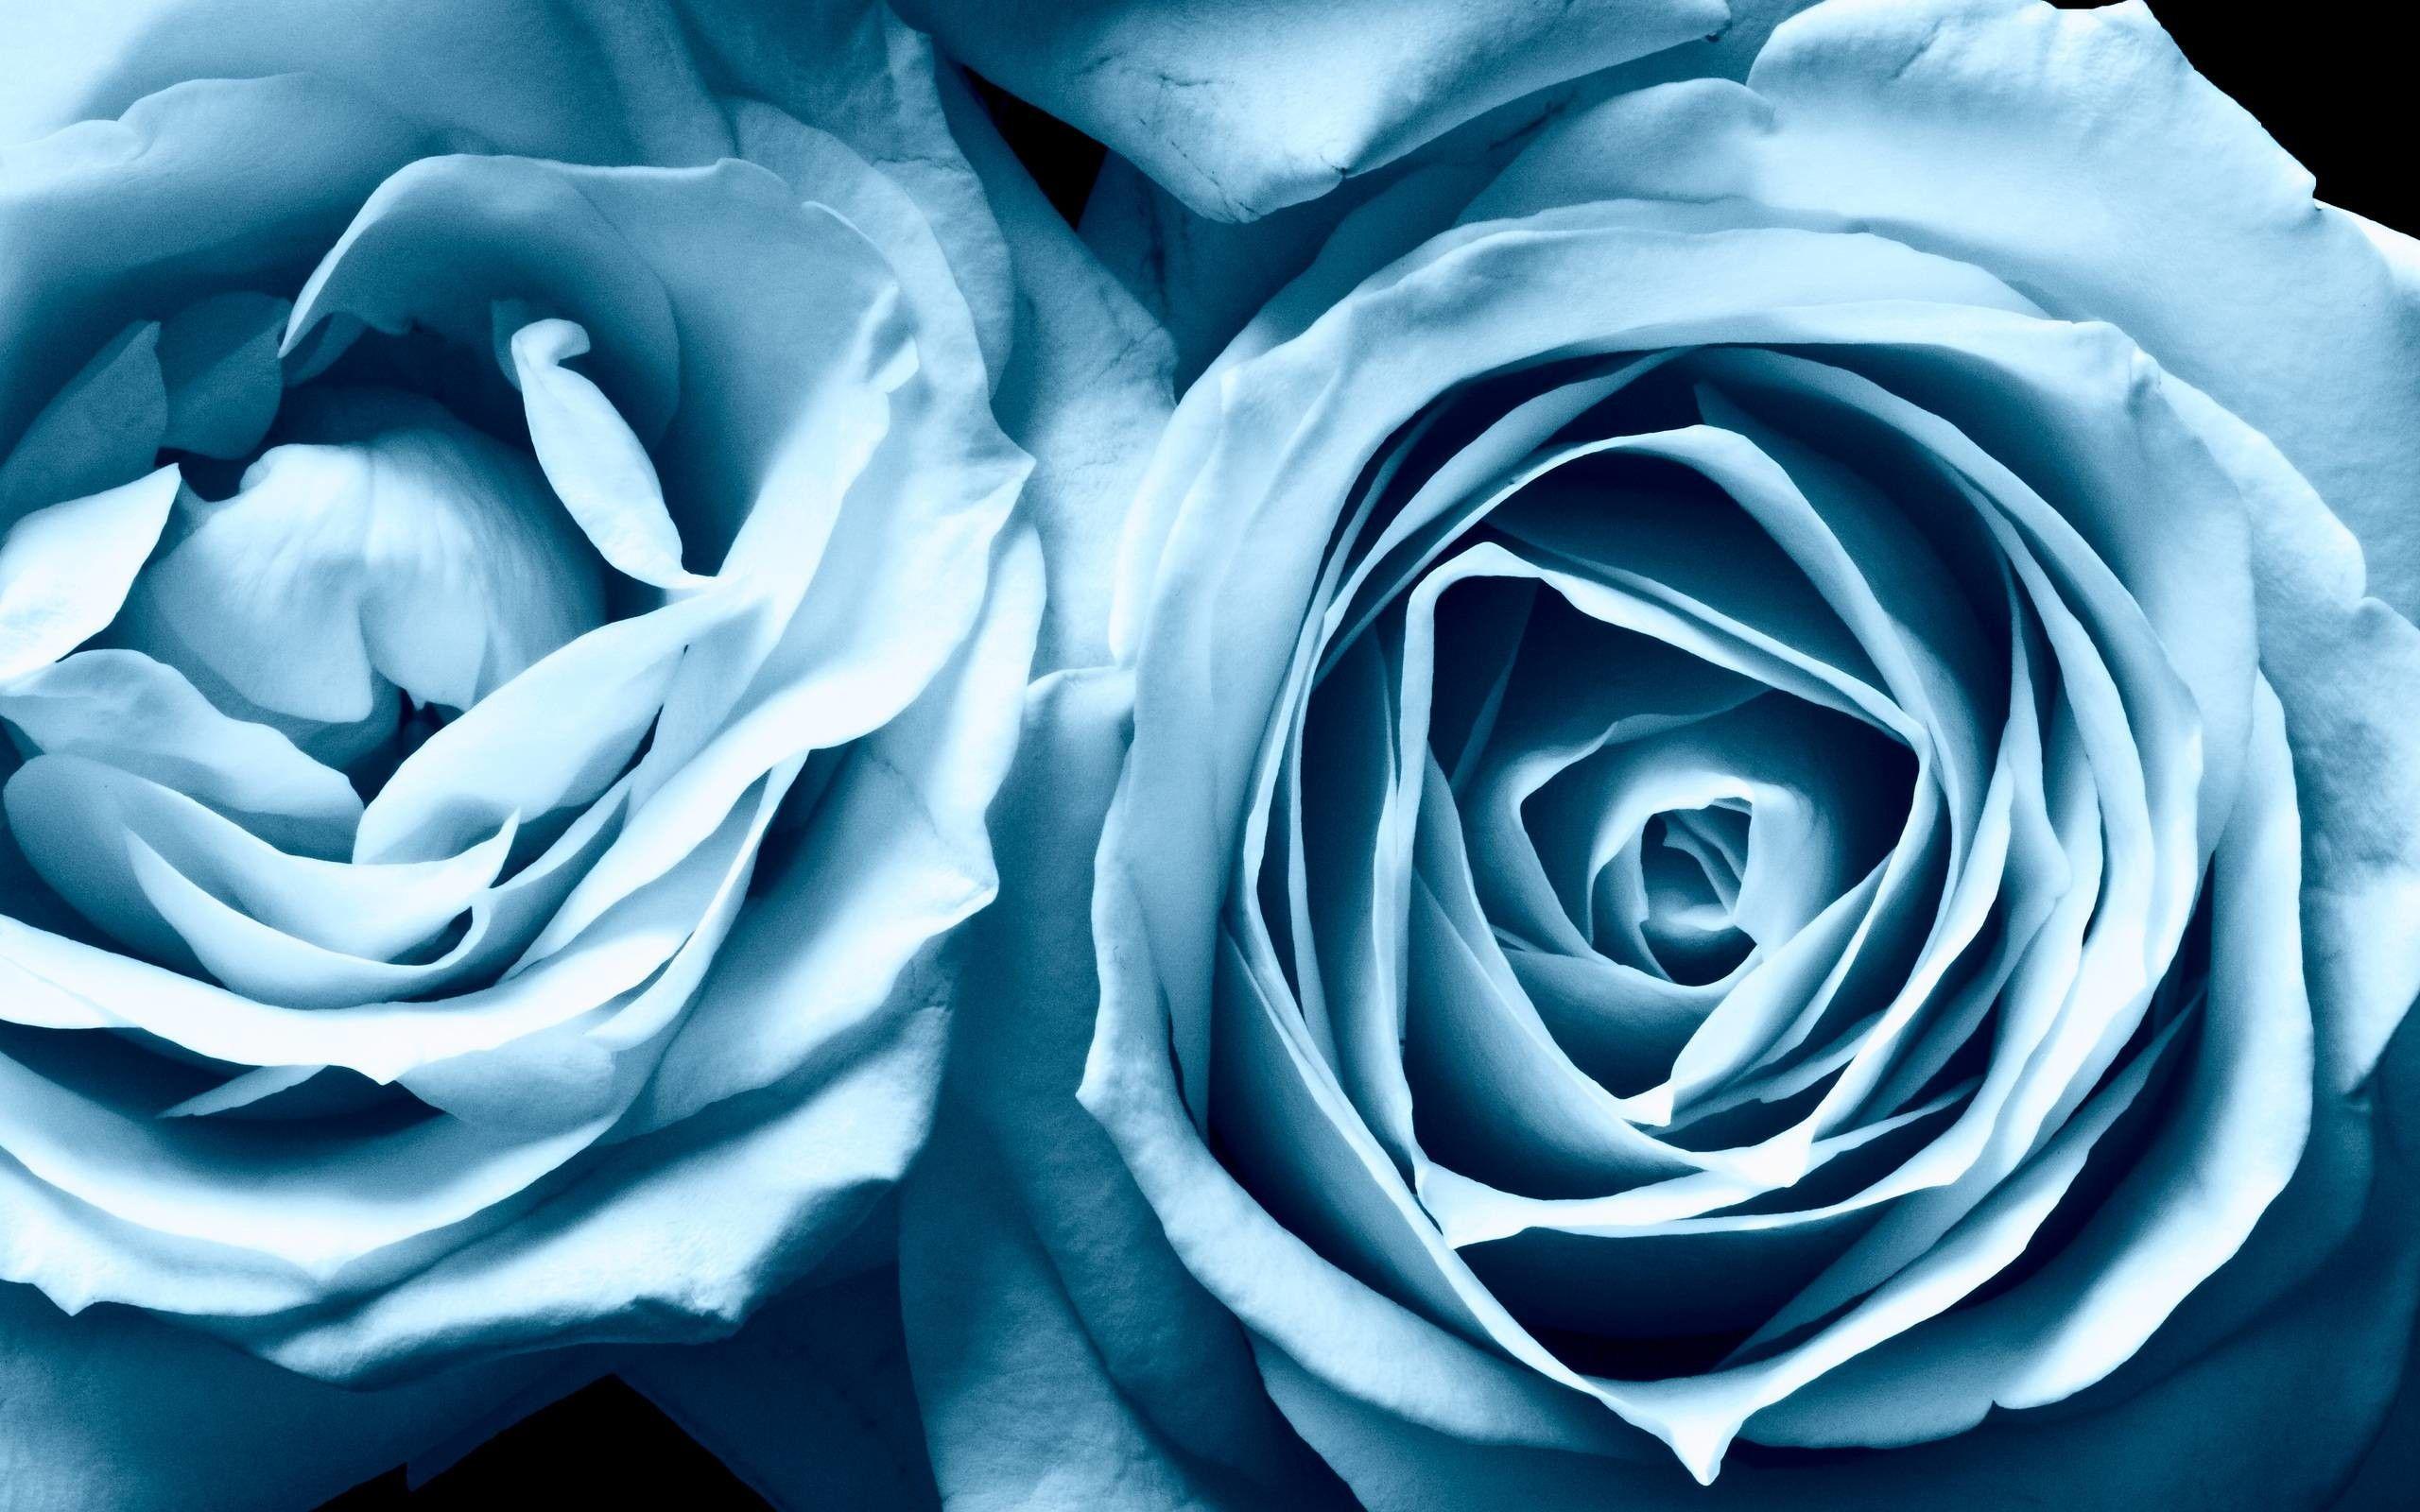 Wallpaper  1920x1080 px blue flowers blue rose minimalism selective  coloring simple background 1920x1080  goodfon  651084  HD Wallpapers   WallHere